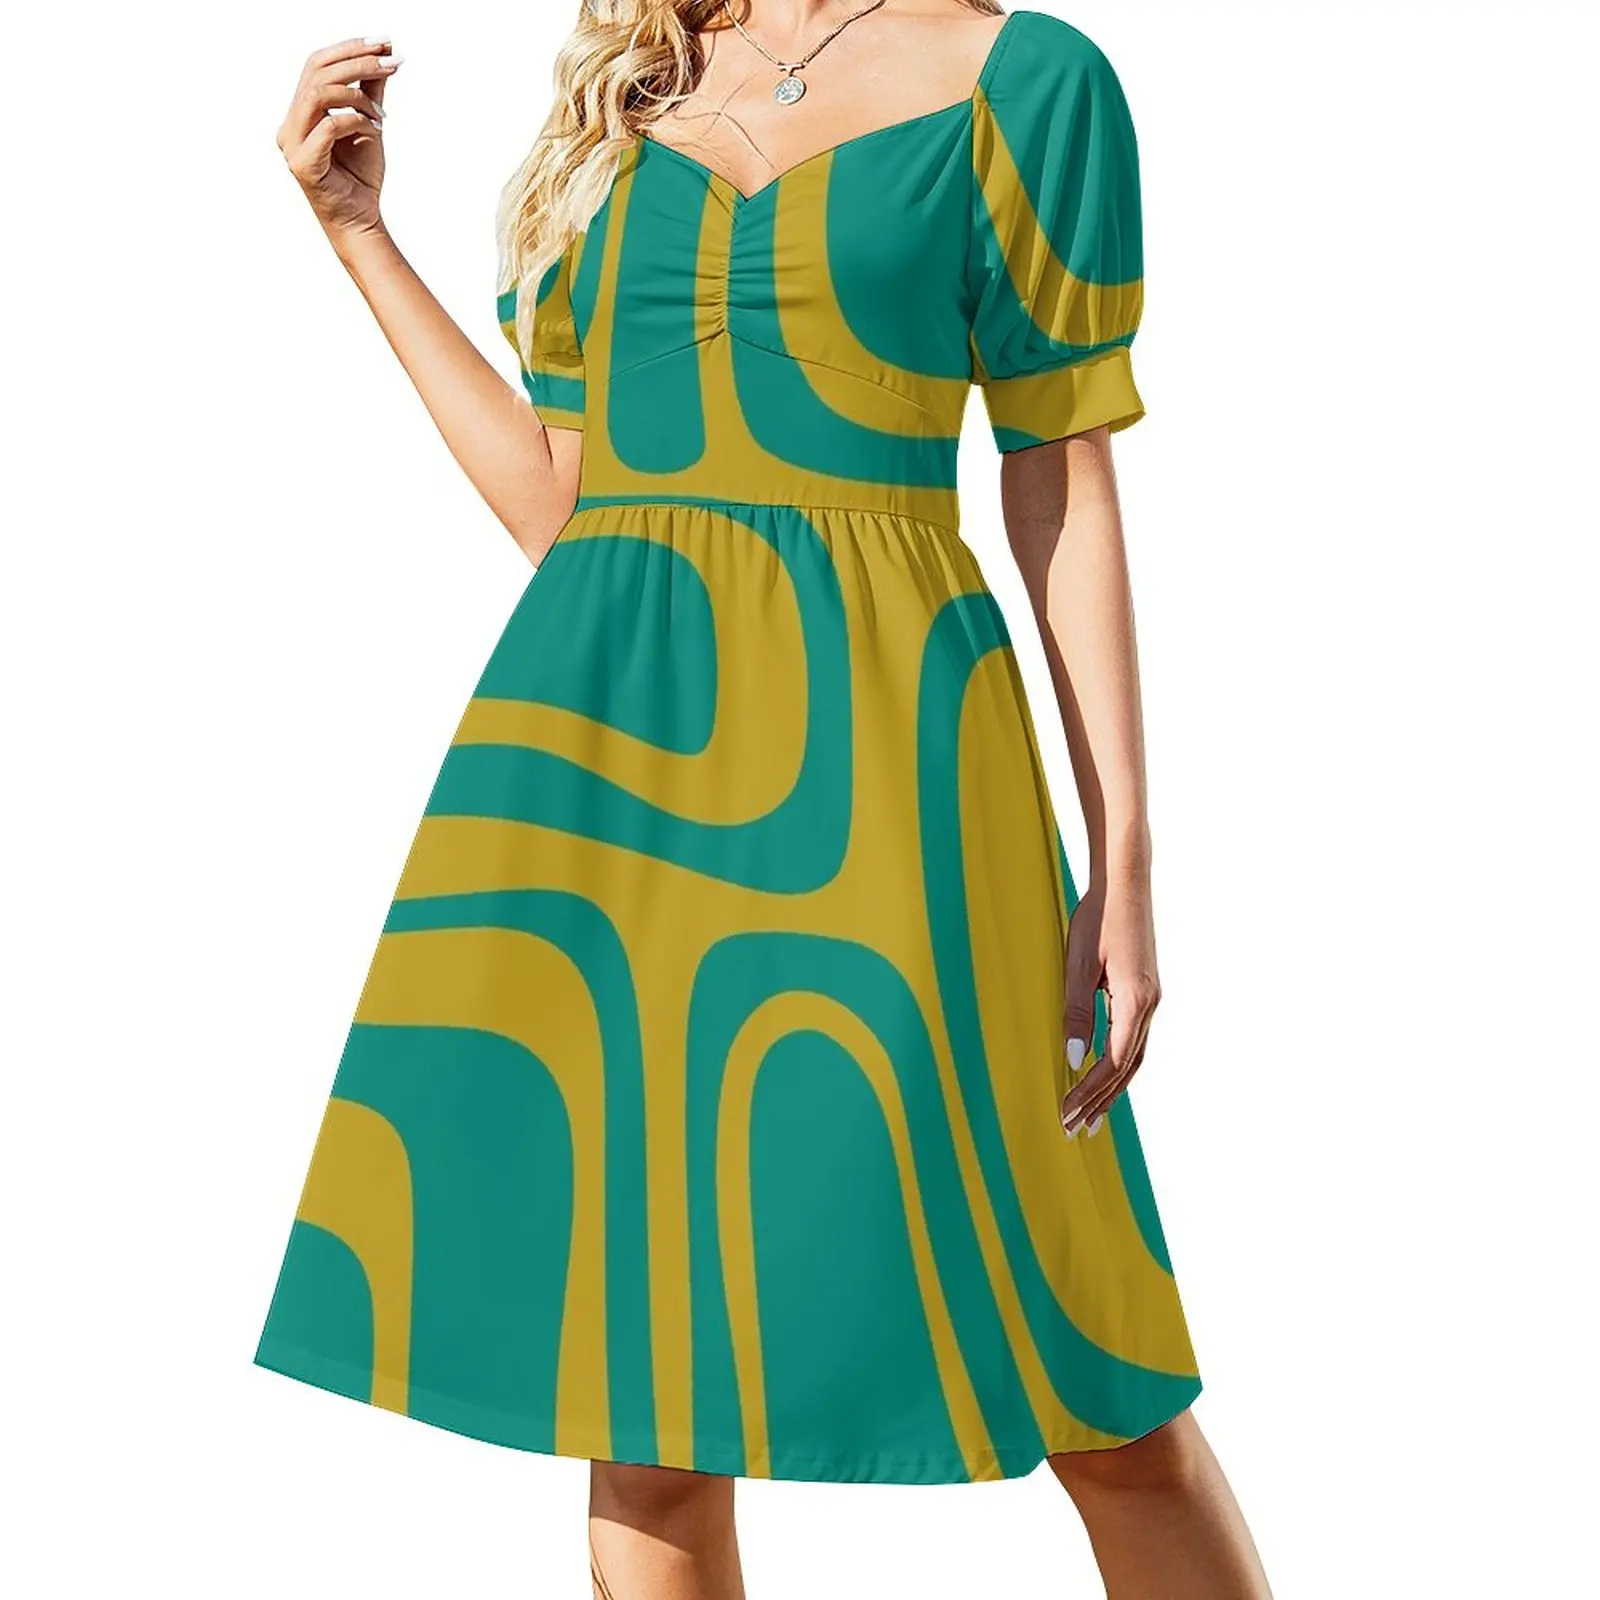 

Palm Springs Retro Midcentury Modern Abstract Pattern in Mid Mod Turquoise Teal and Mustard Dress evening dress woman